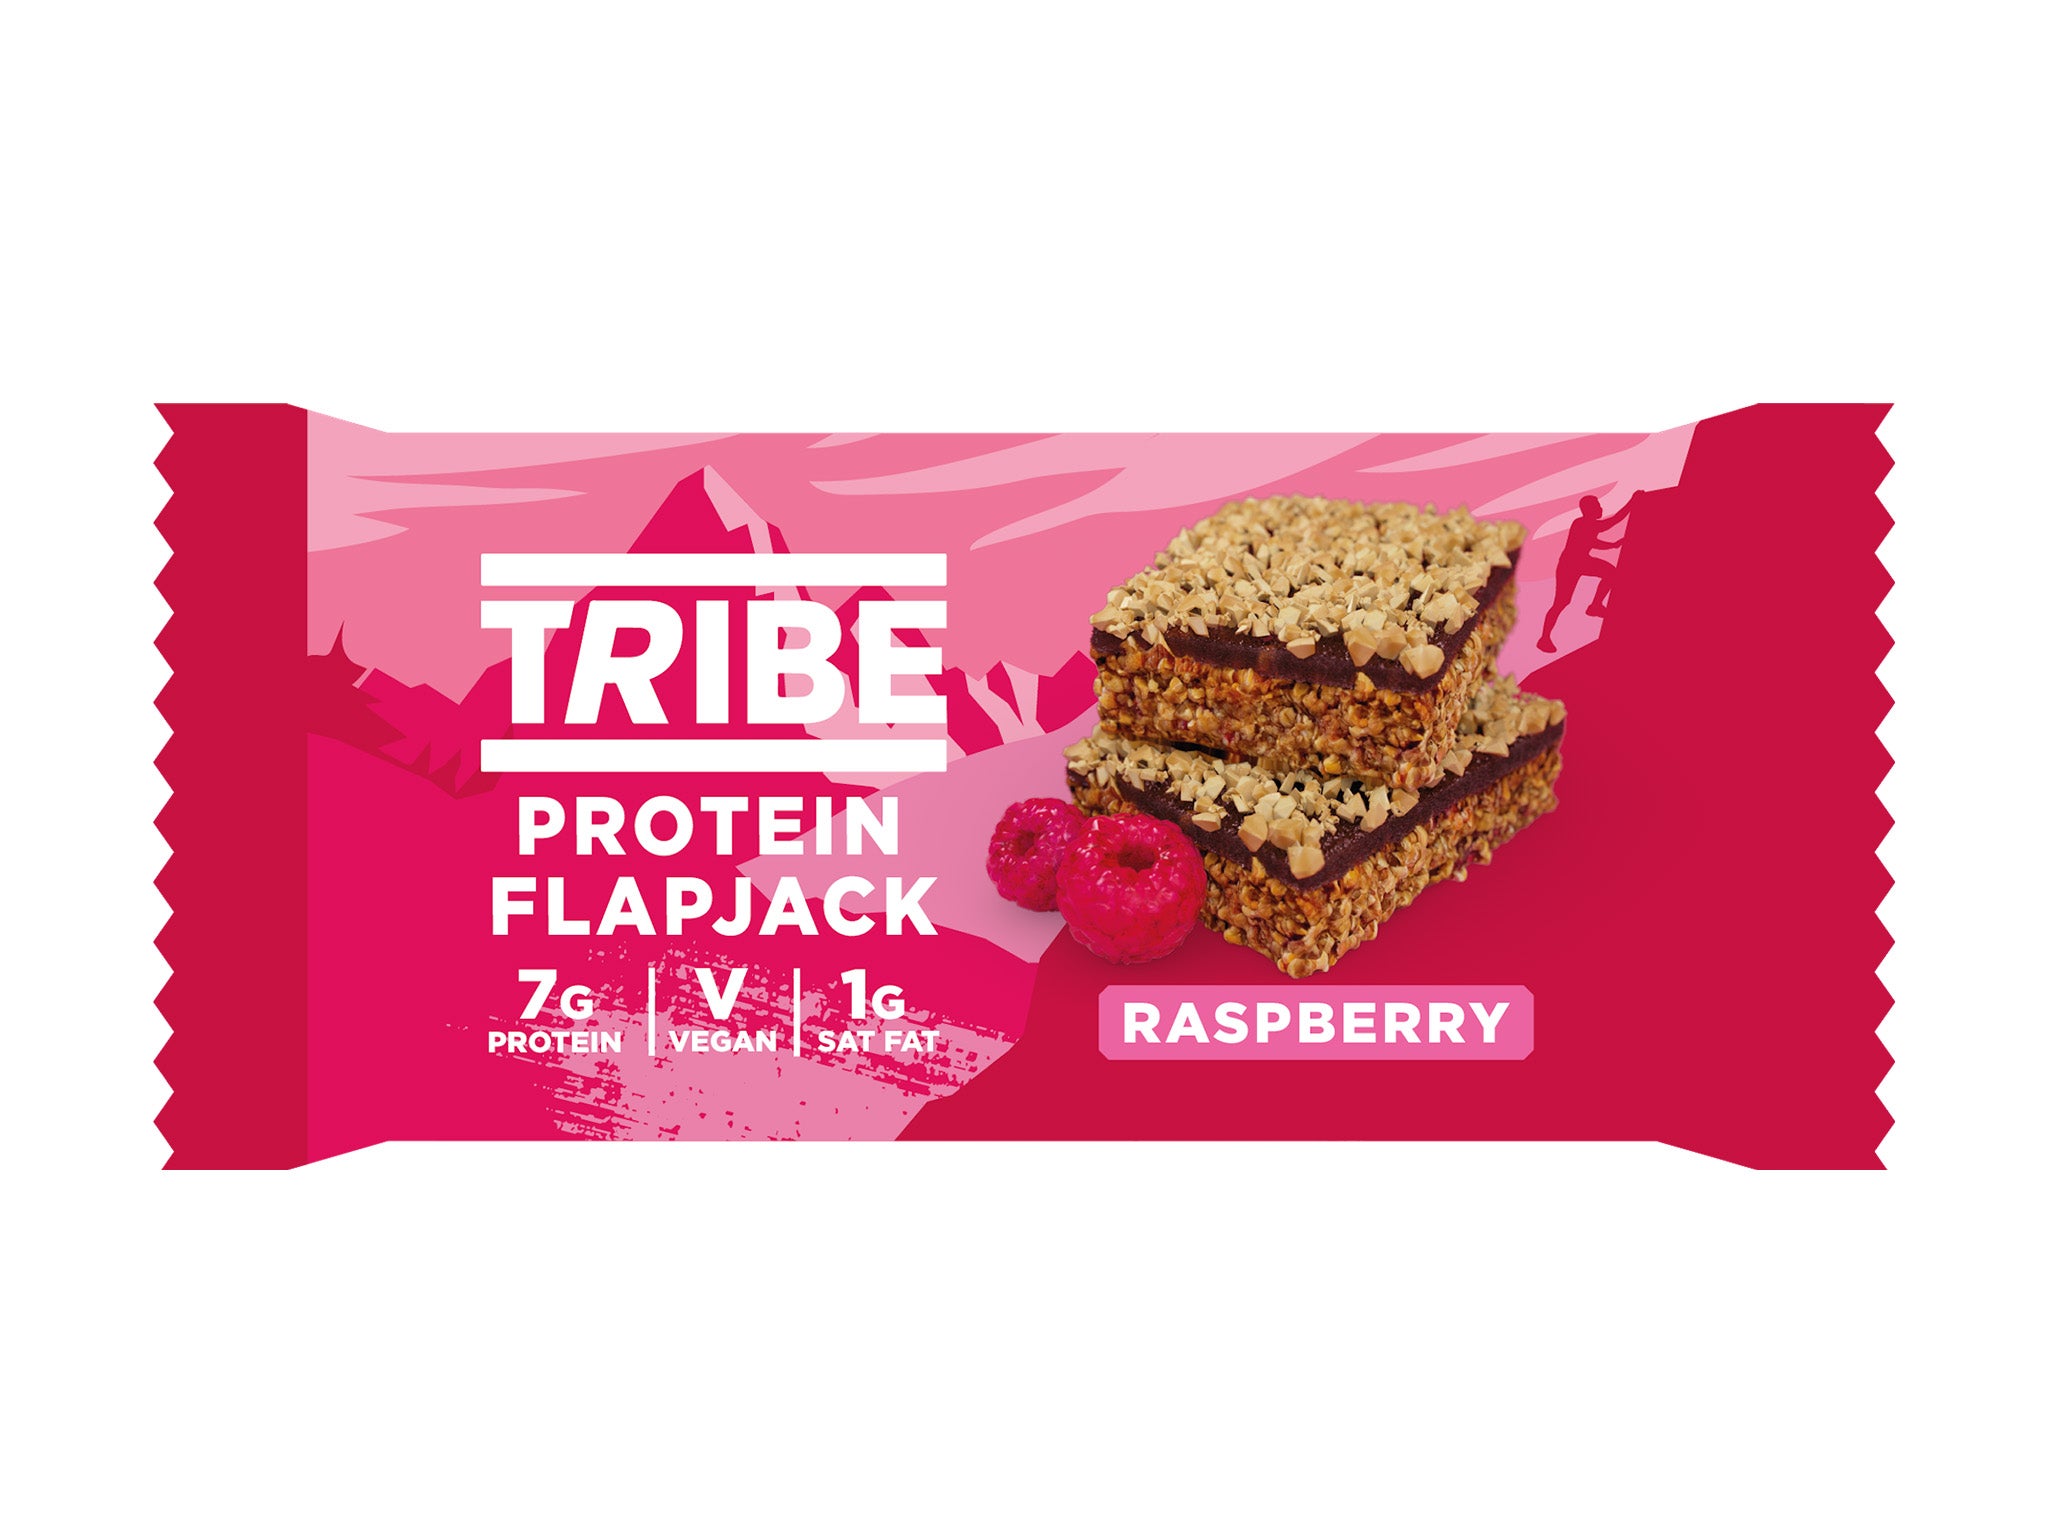 Tribe protein flapjack indybest